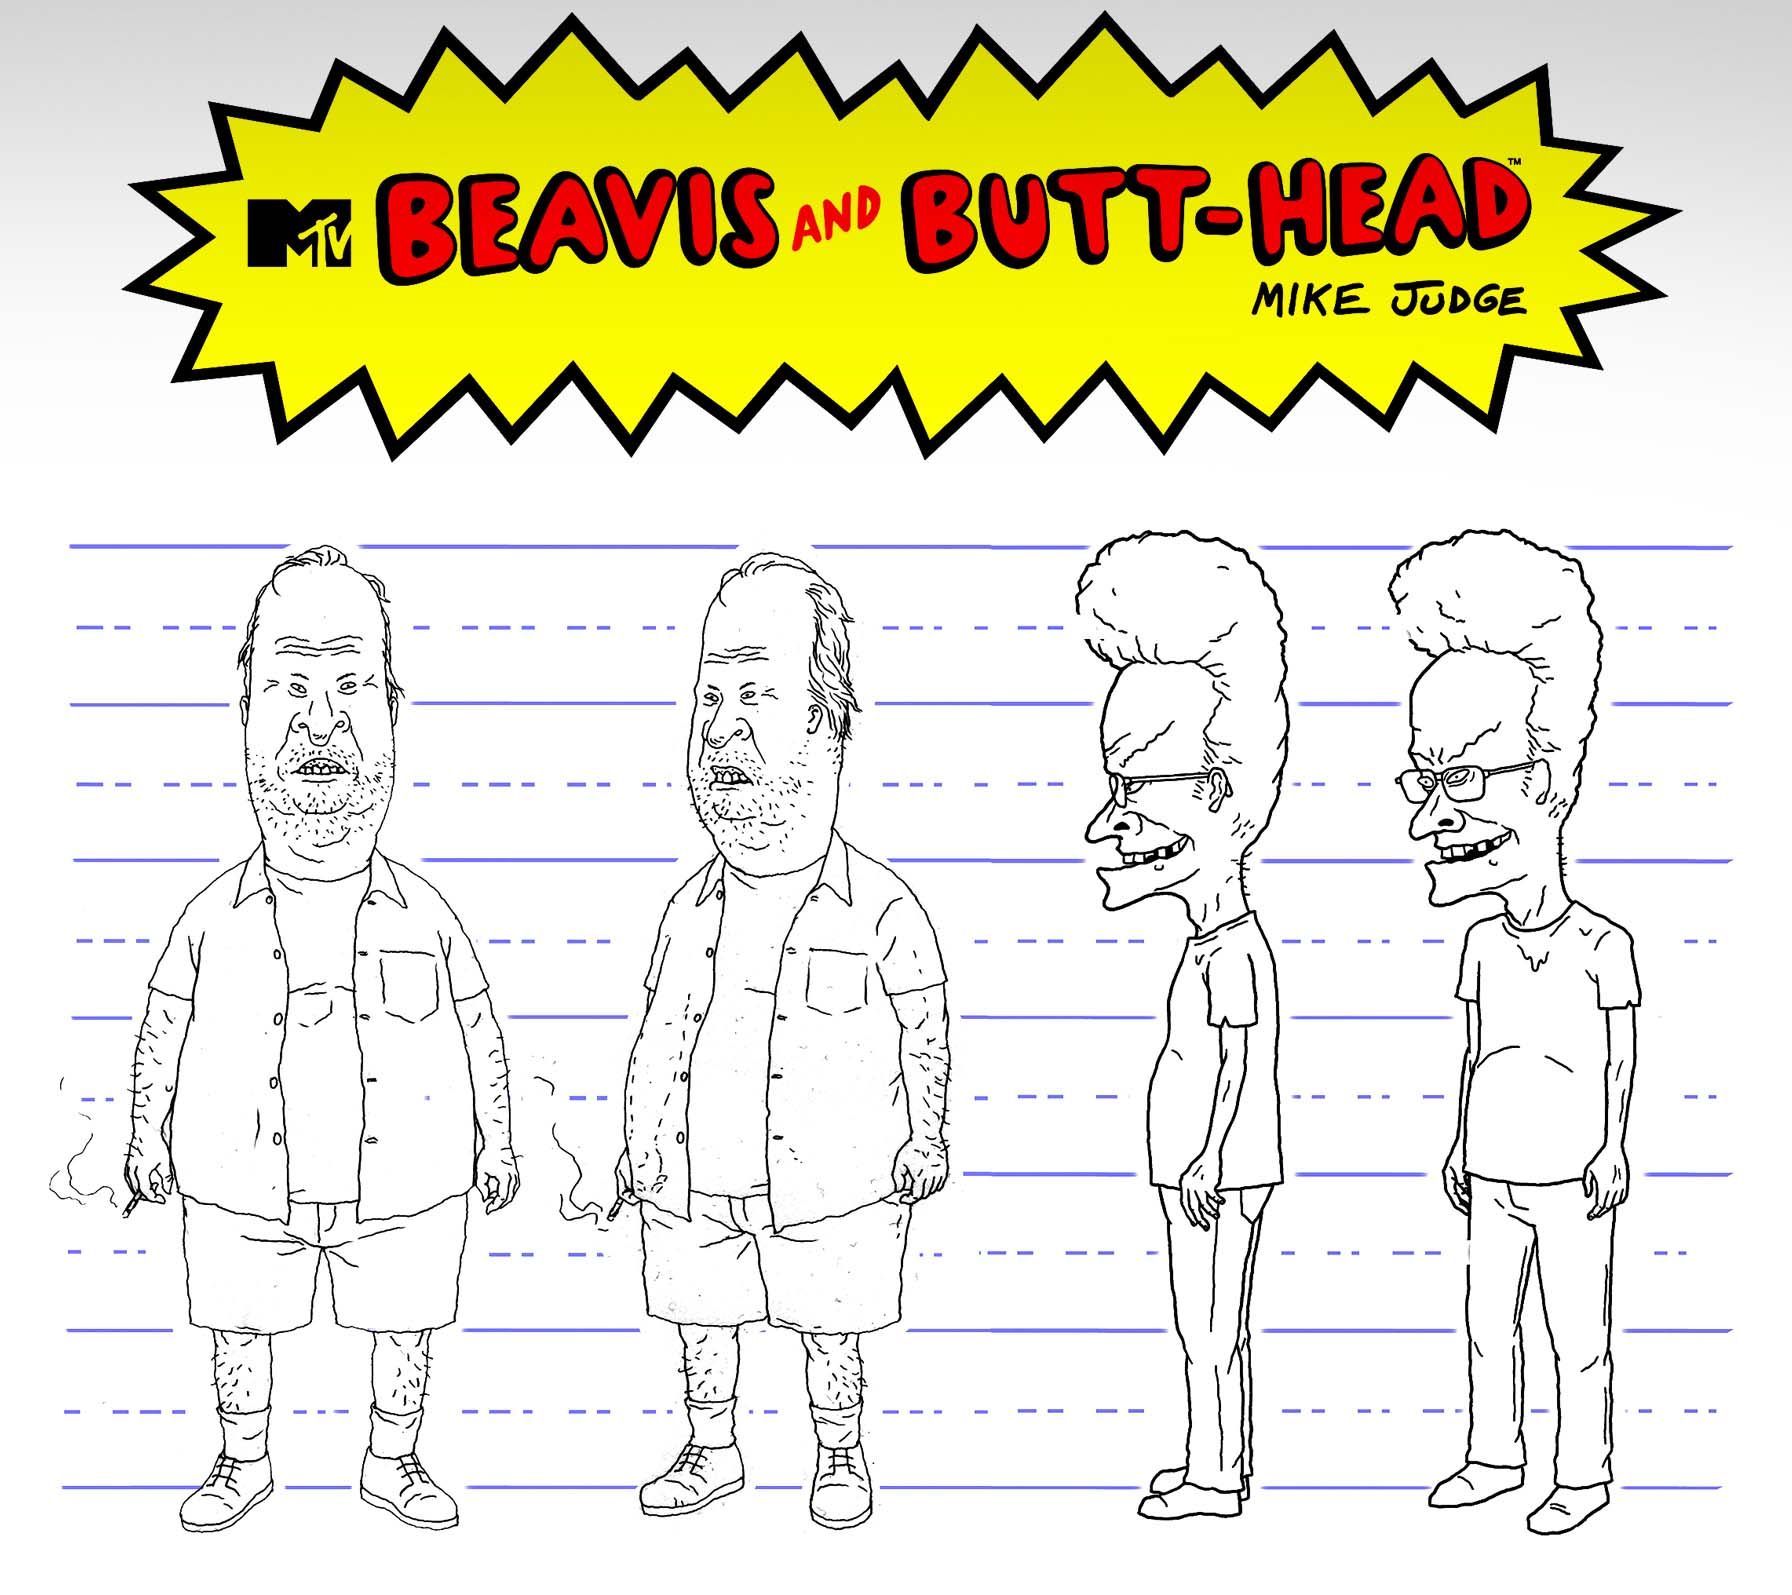 Beavis & Butt-Head Movie Time Jump, Title & Synopsis Revealed